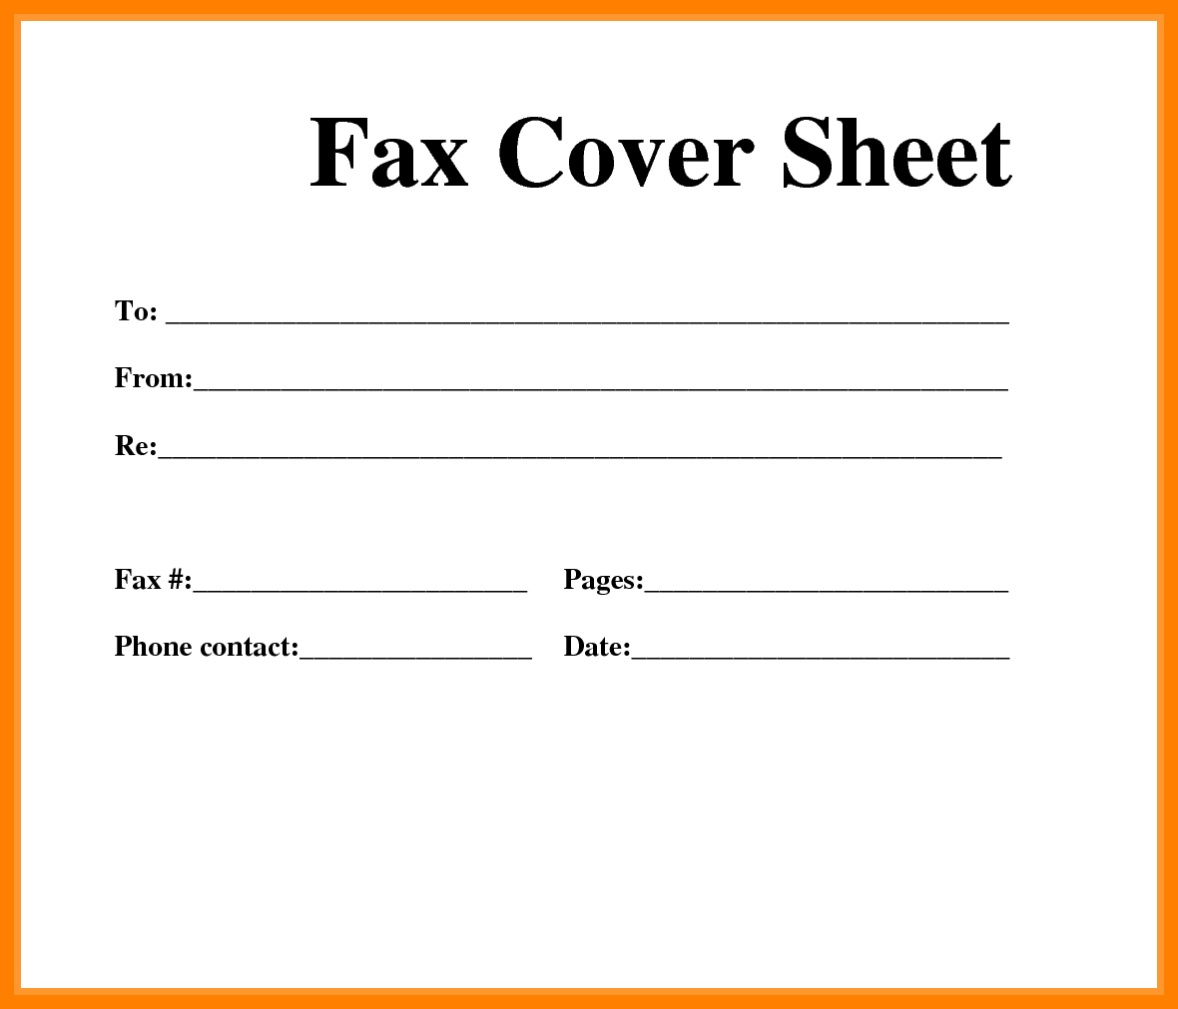 Printable Cover Sheet | Ellipsis - Free Printable Fax Cover Sheet